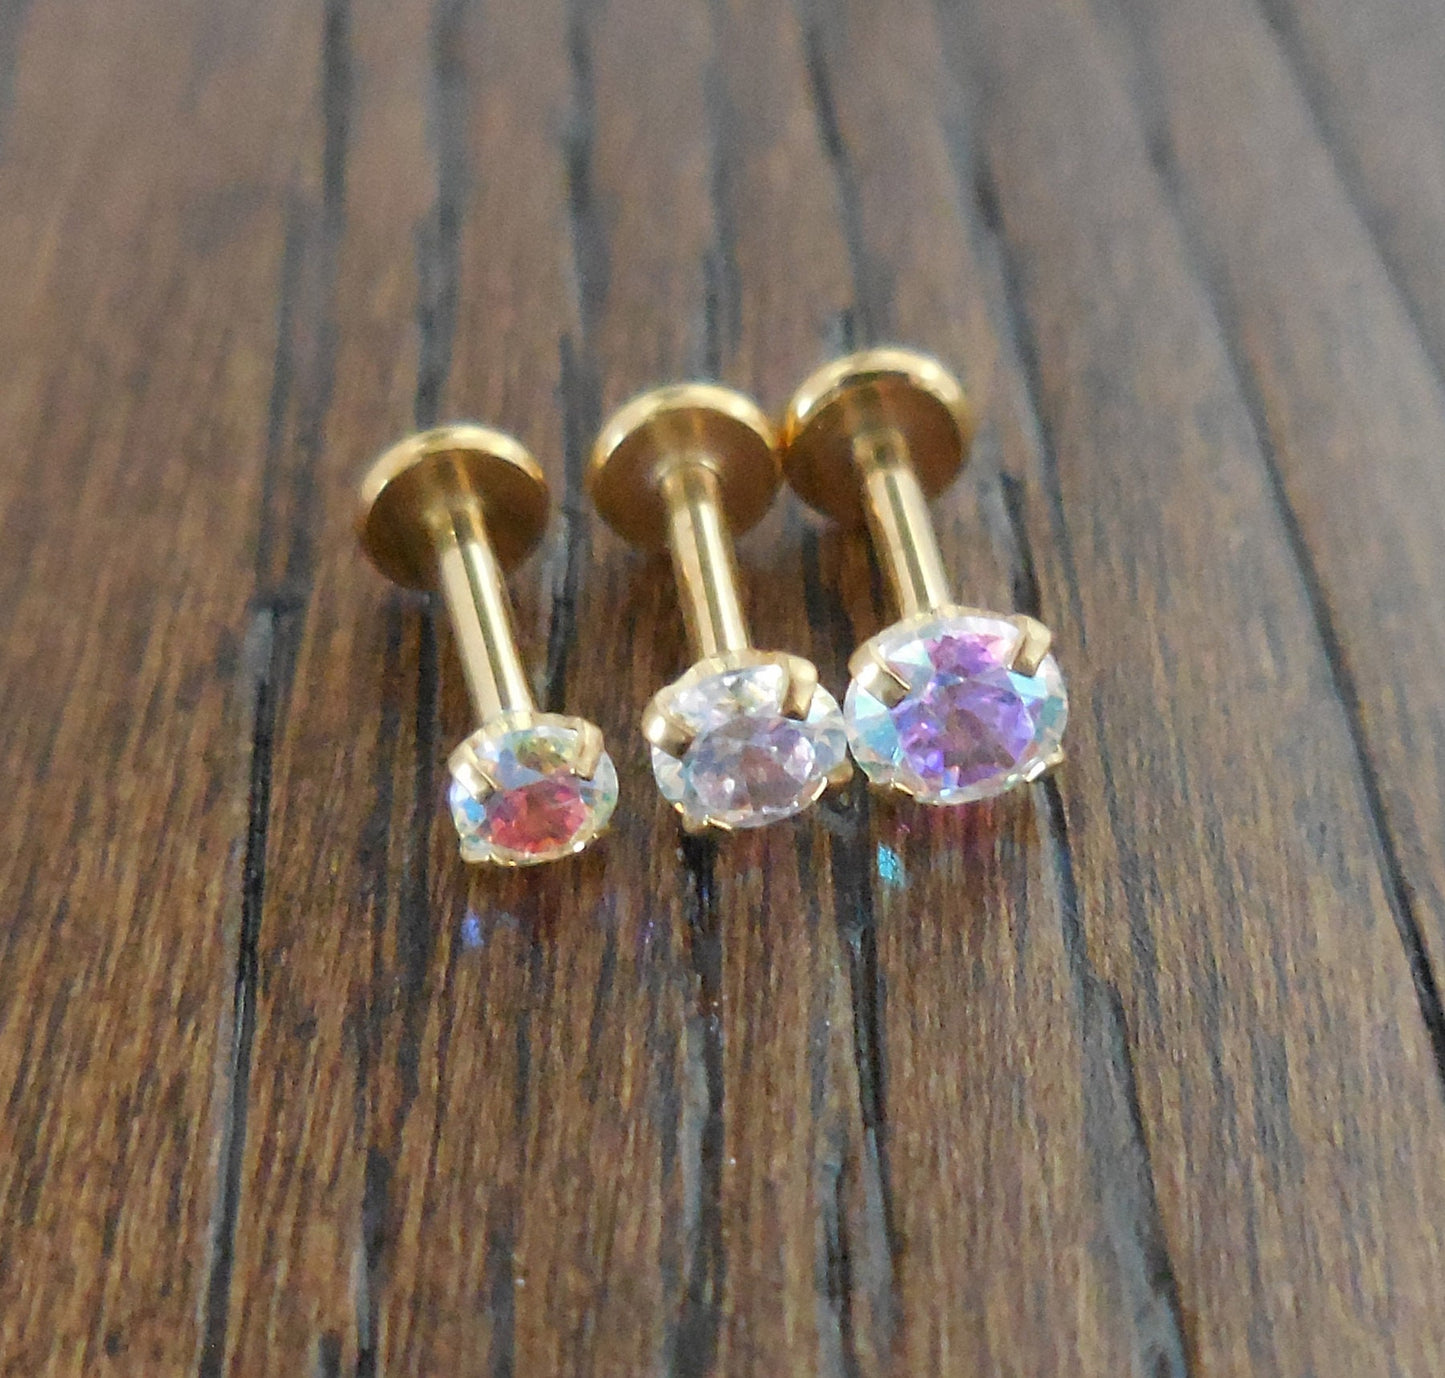 16g 2-4mm Tragus 6mm-8mm AB Crystal Push Pin Labret Nose Ring Titanium Prong Set Stone Cartilage Earrings Gold Tone Triple Helix Thread Less